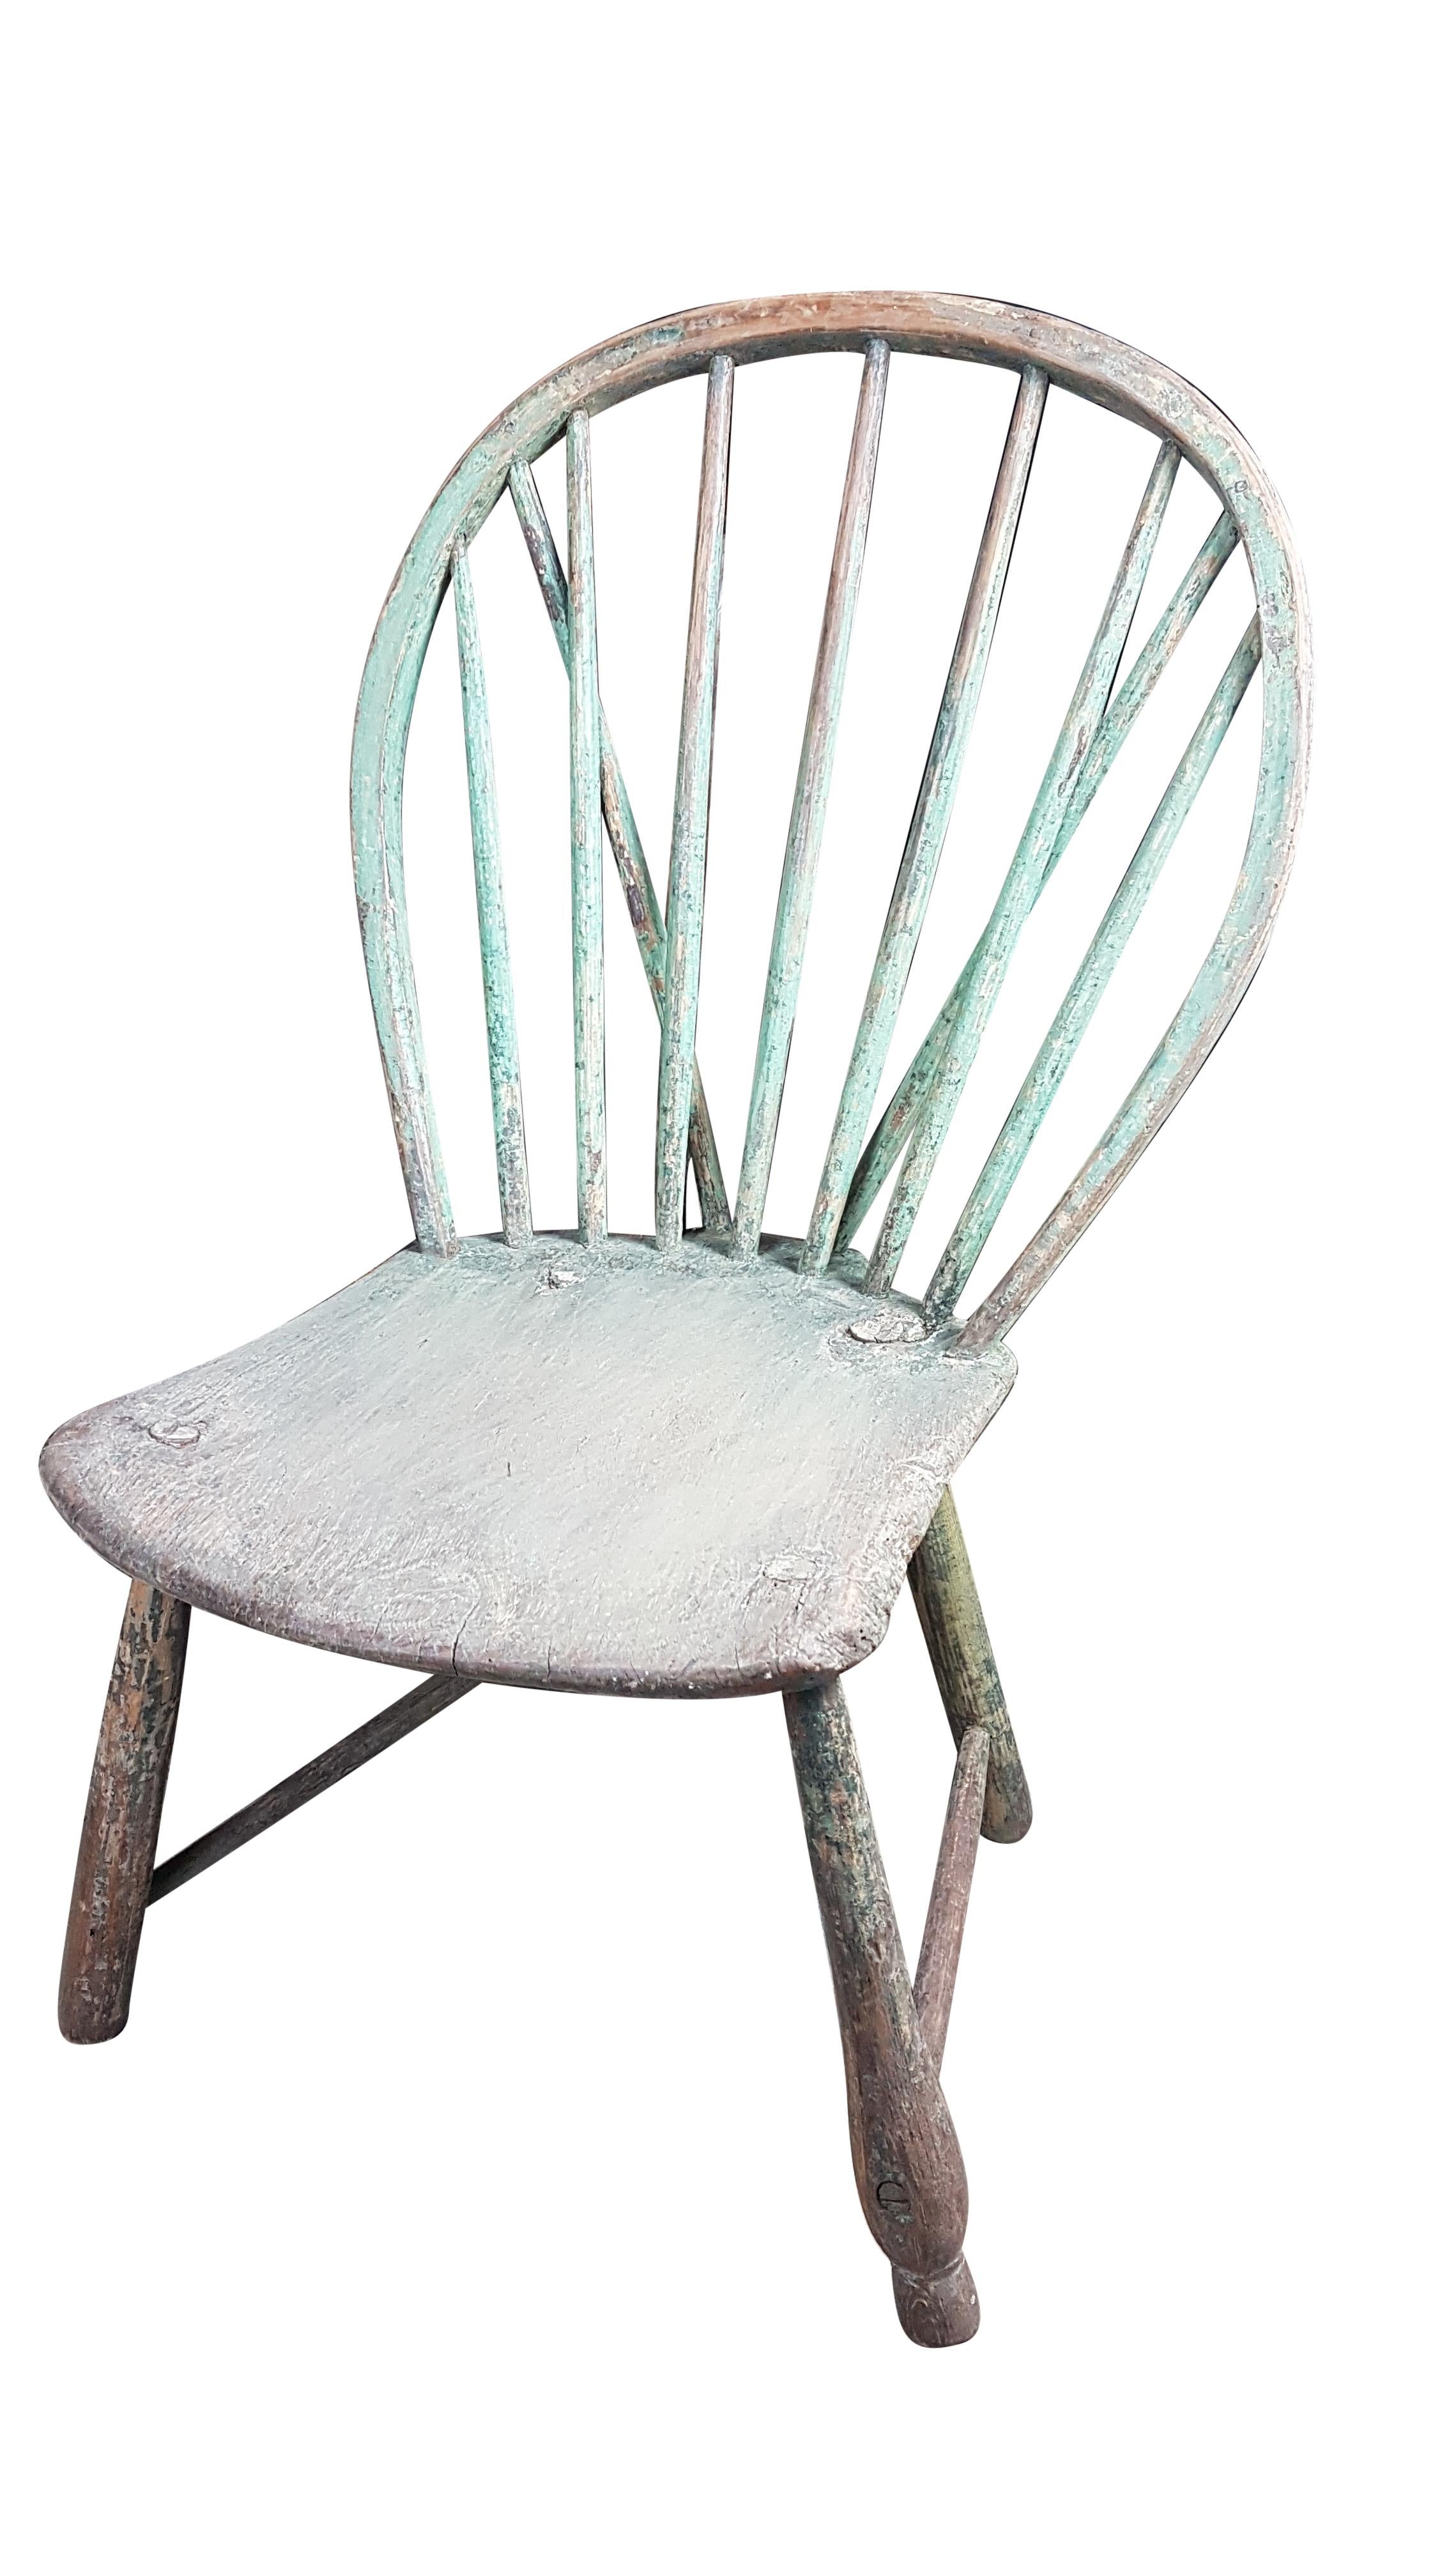 A beautiful rustic original 18th century West Country Yealmpton hoop back chair that has carefully been taken back to its original painted green finish which is very vibrant. It has three types of legs but all have the same original base paint color